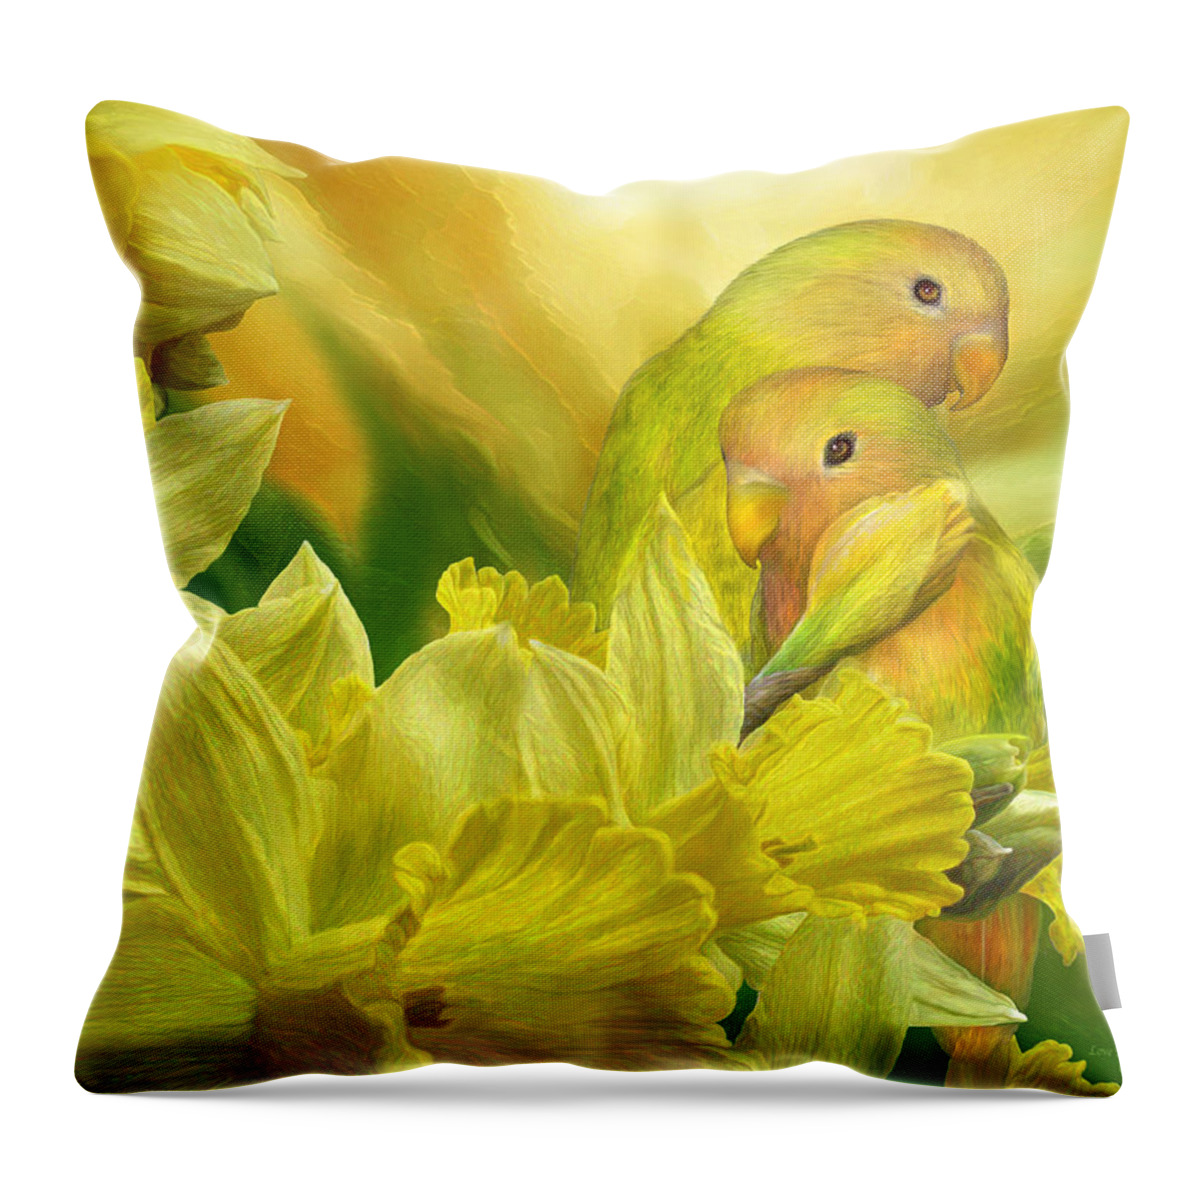 Daffodil Art Throw Pillow featuring the mixed media Love Among The Daffodils by Carol Cavalaris